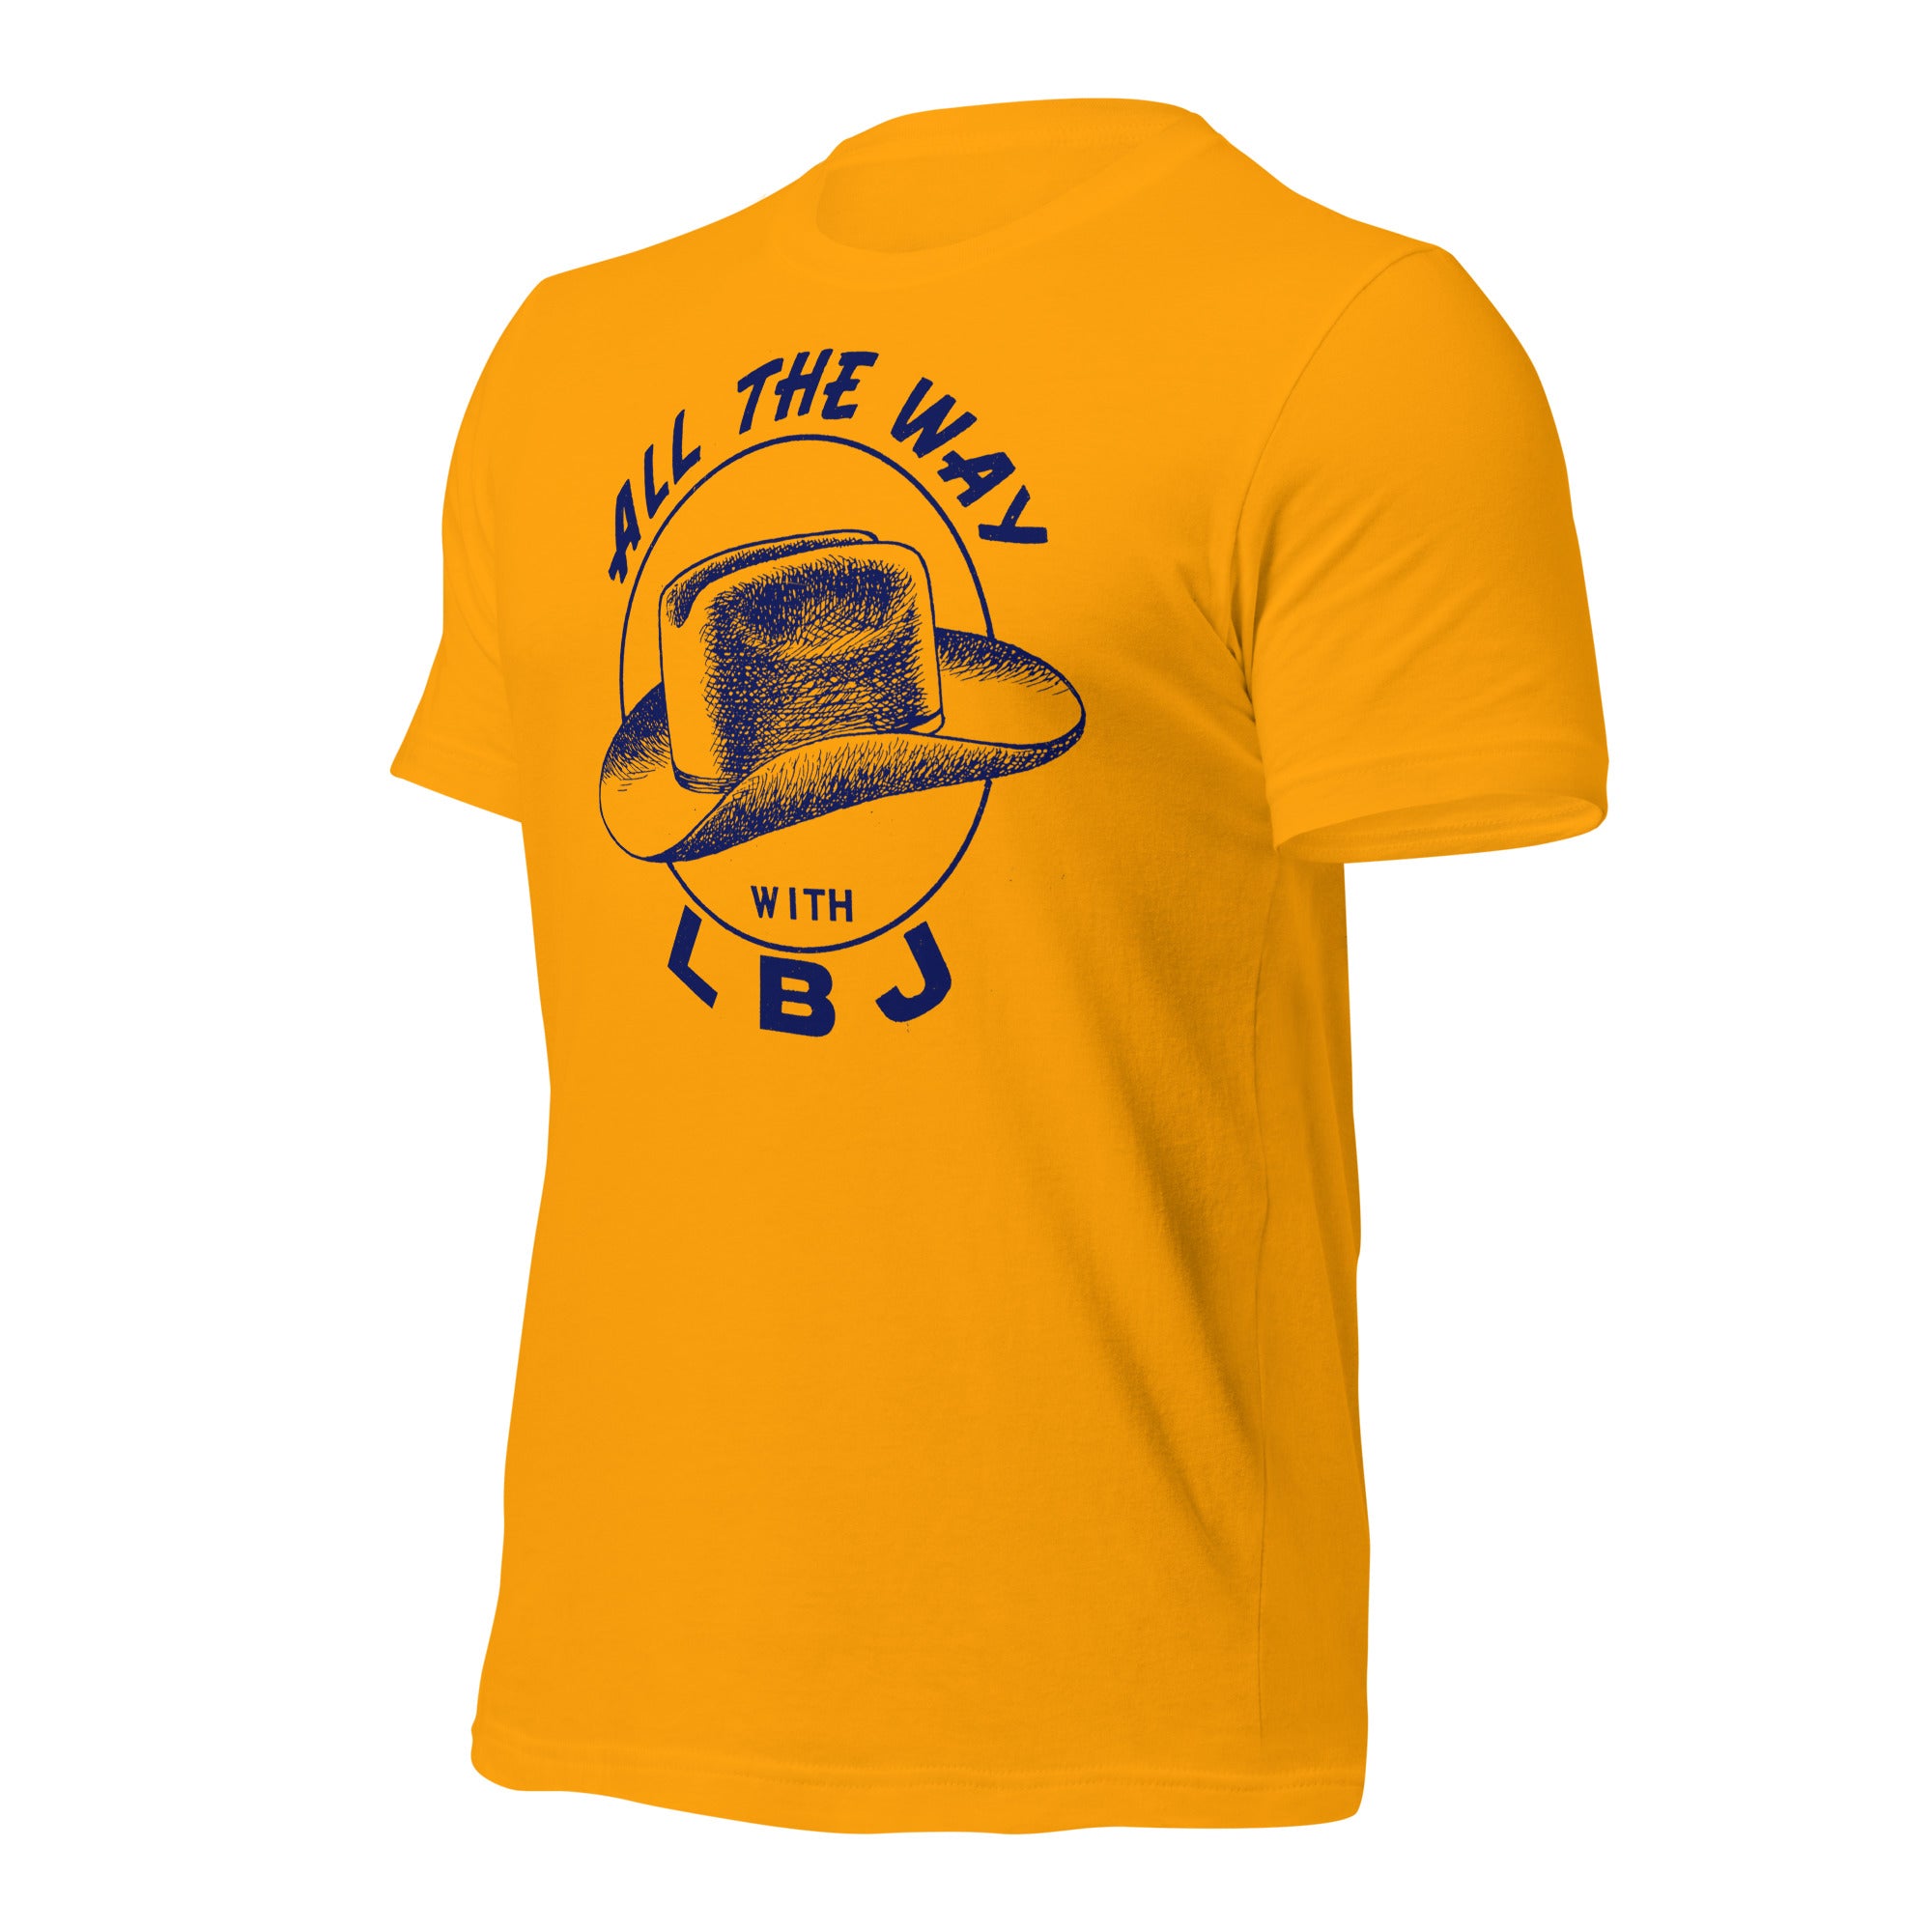 All the Way with LBJ 1964 Reproduction Campaign Short-Sleeve Unisex T-Shirt